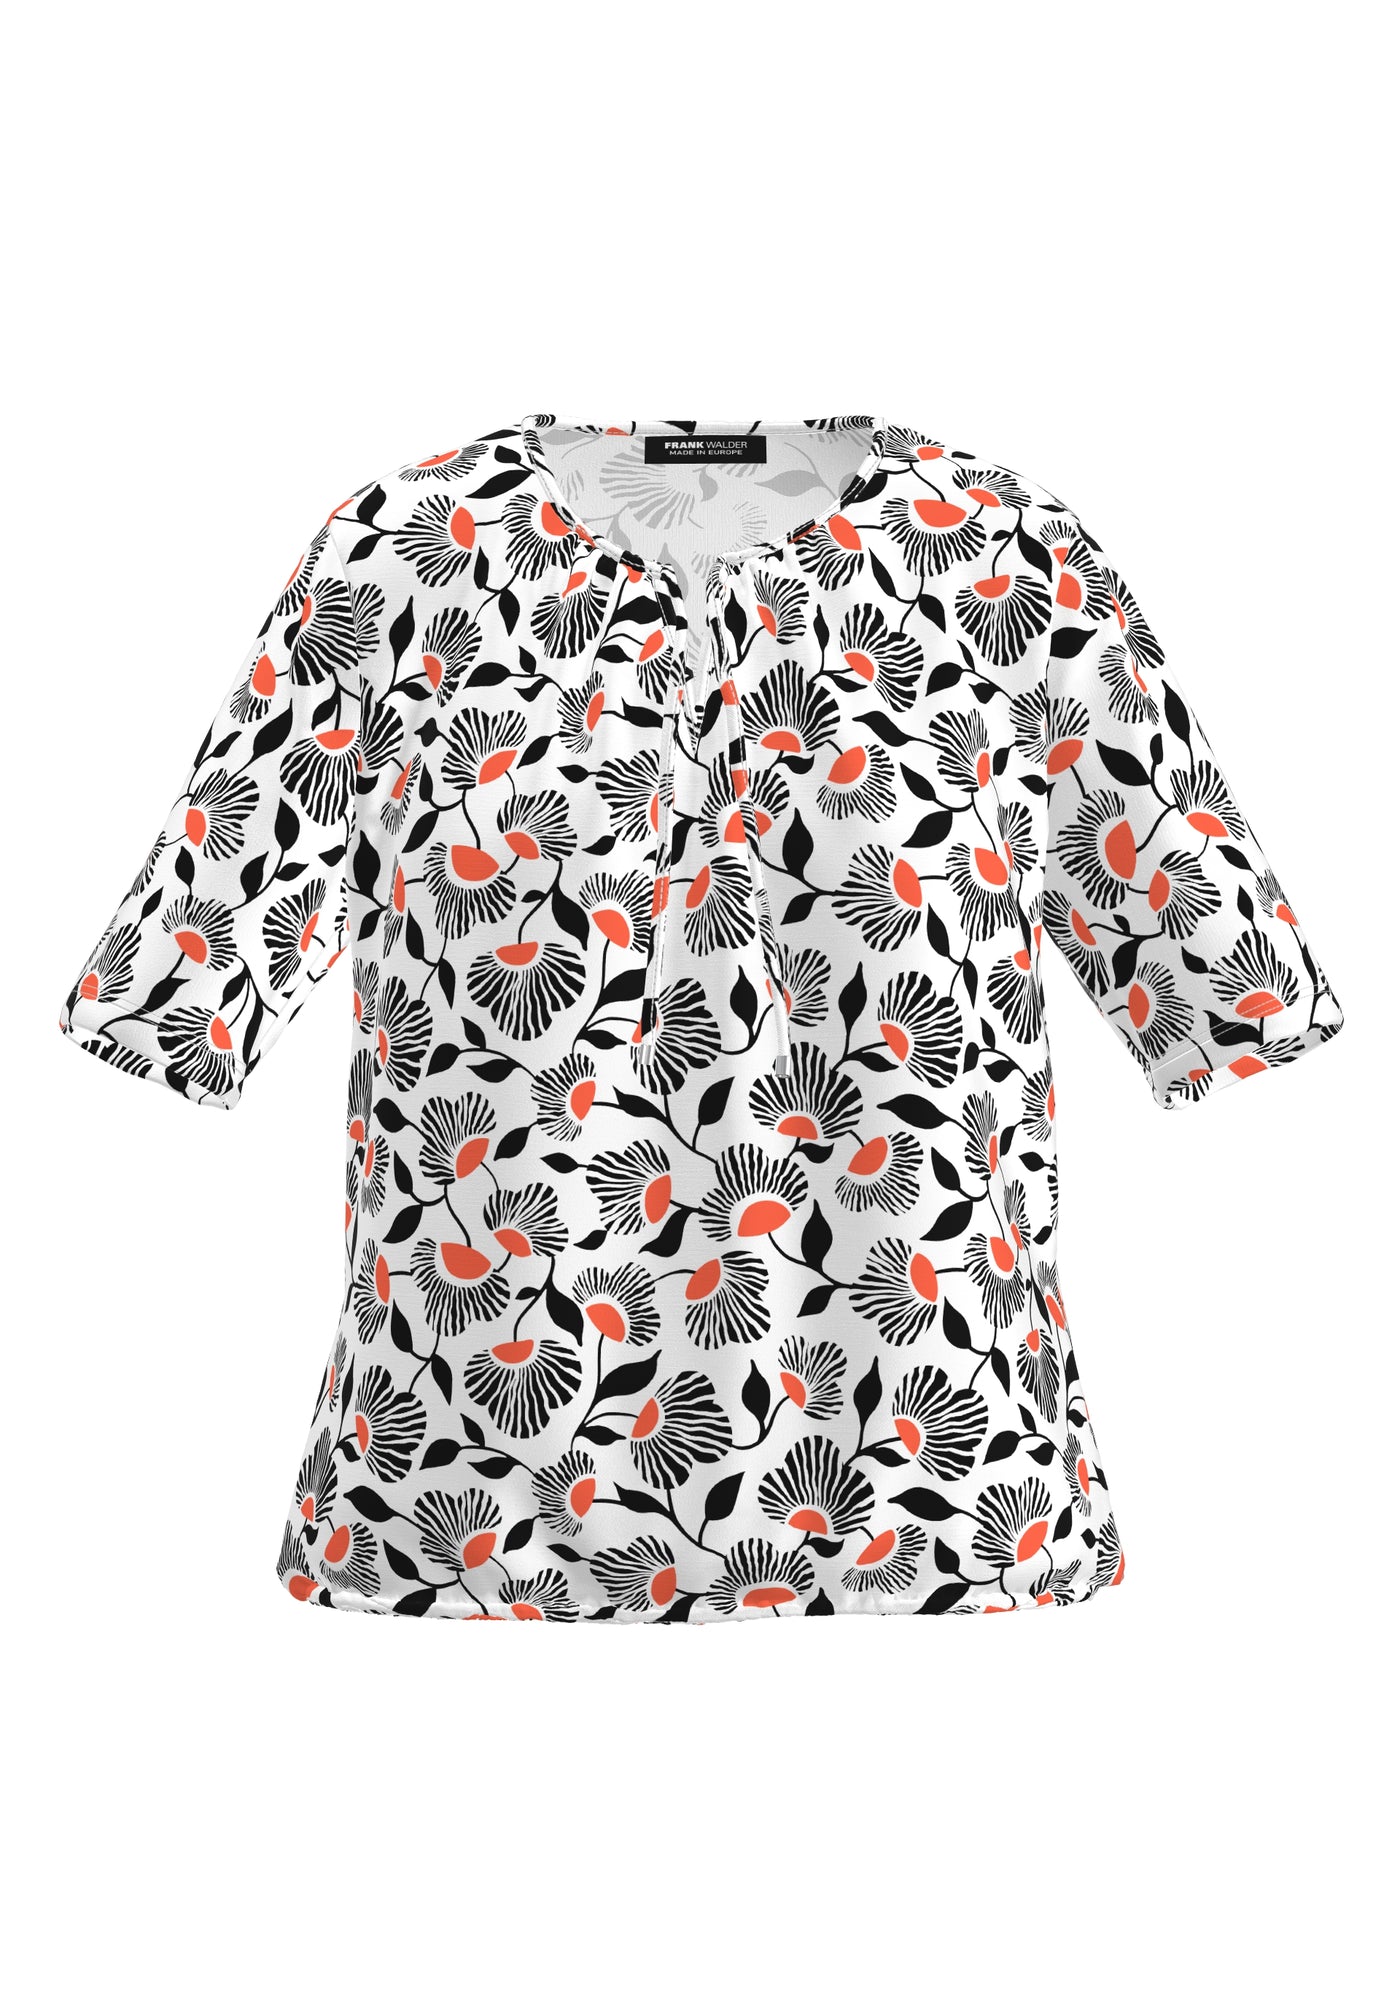 Dandelion Print Top with Tie Neck and Elasticated Waist